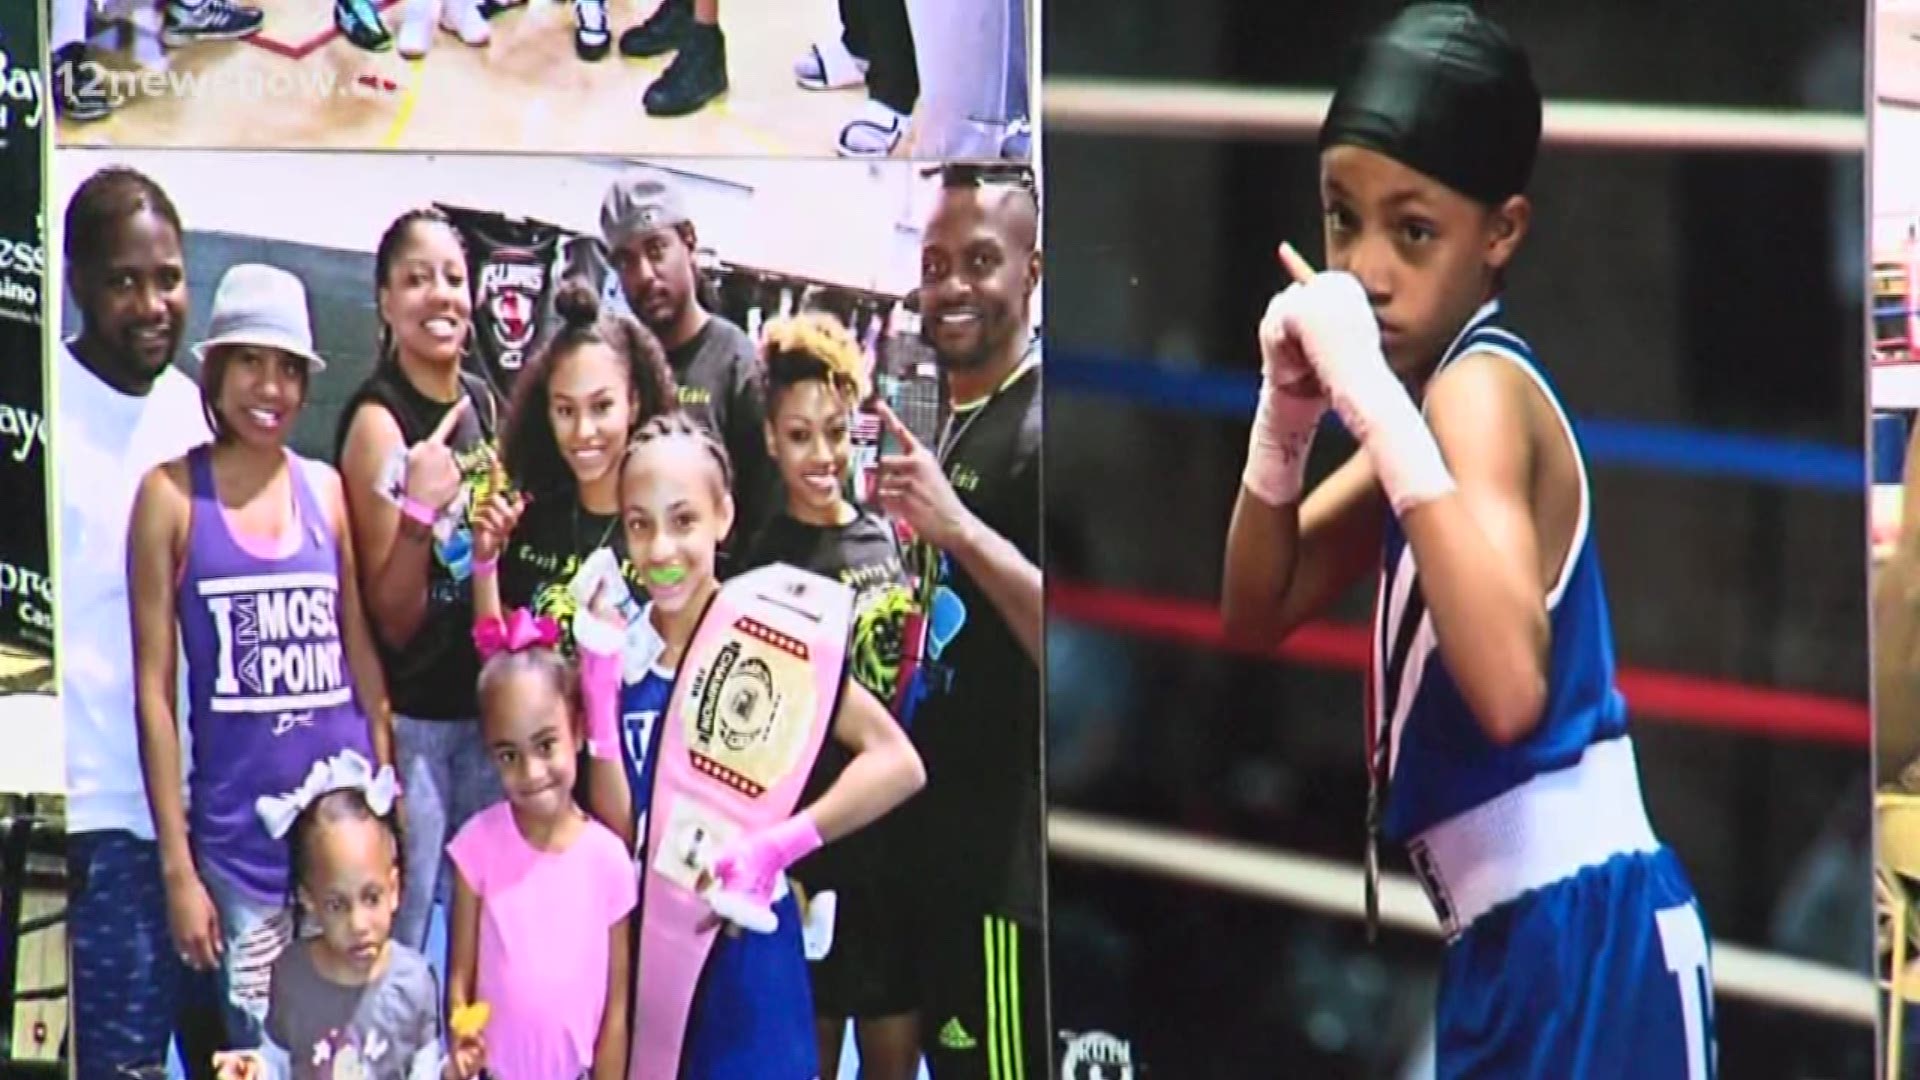 Zyloin Edwards overcame the odds to win the 2019 USA Boxing Championship